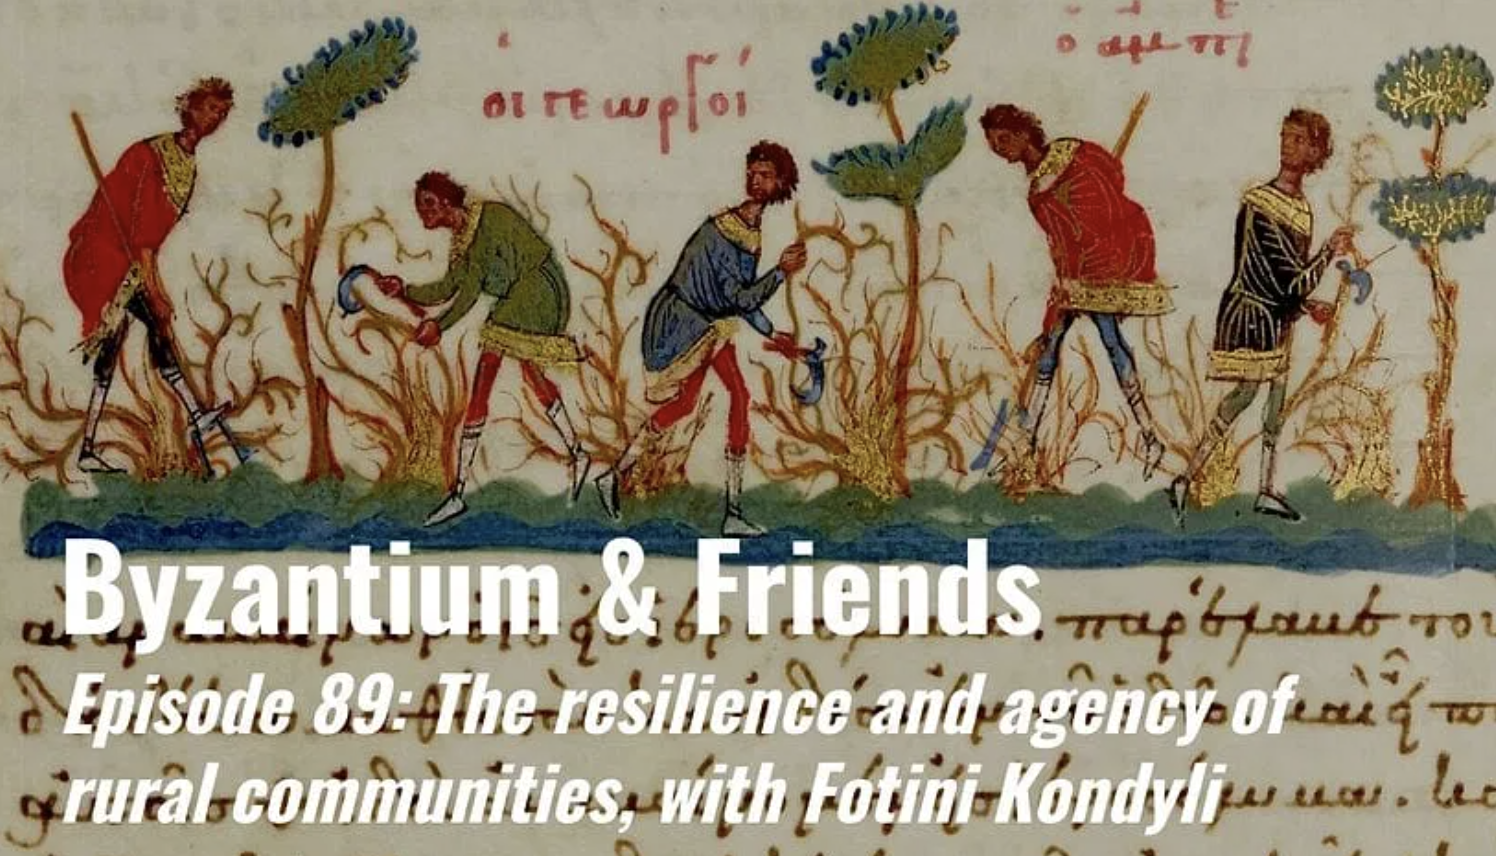 A cover image for a podcast about "Byzantium & Friends"